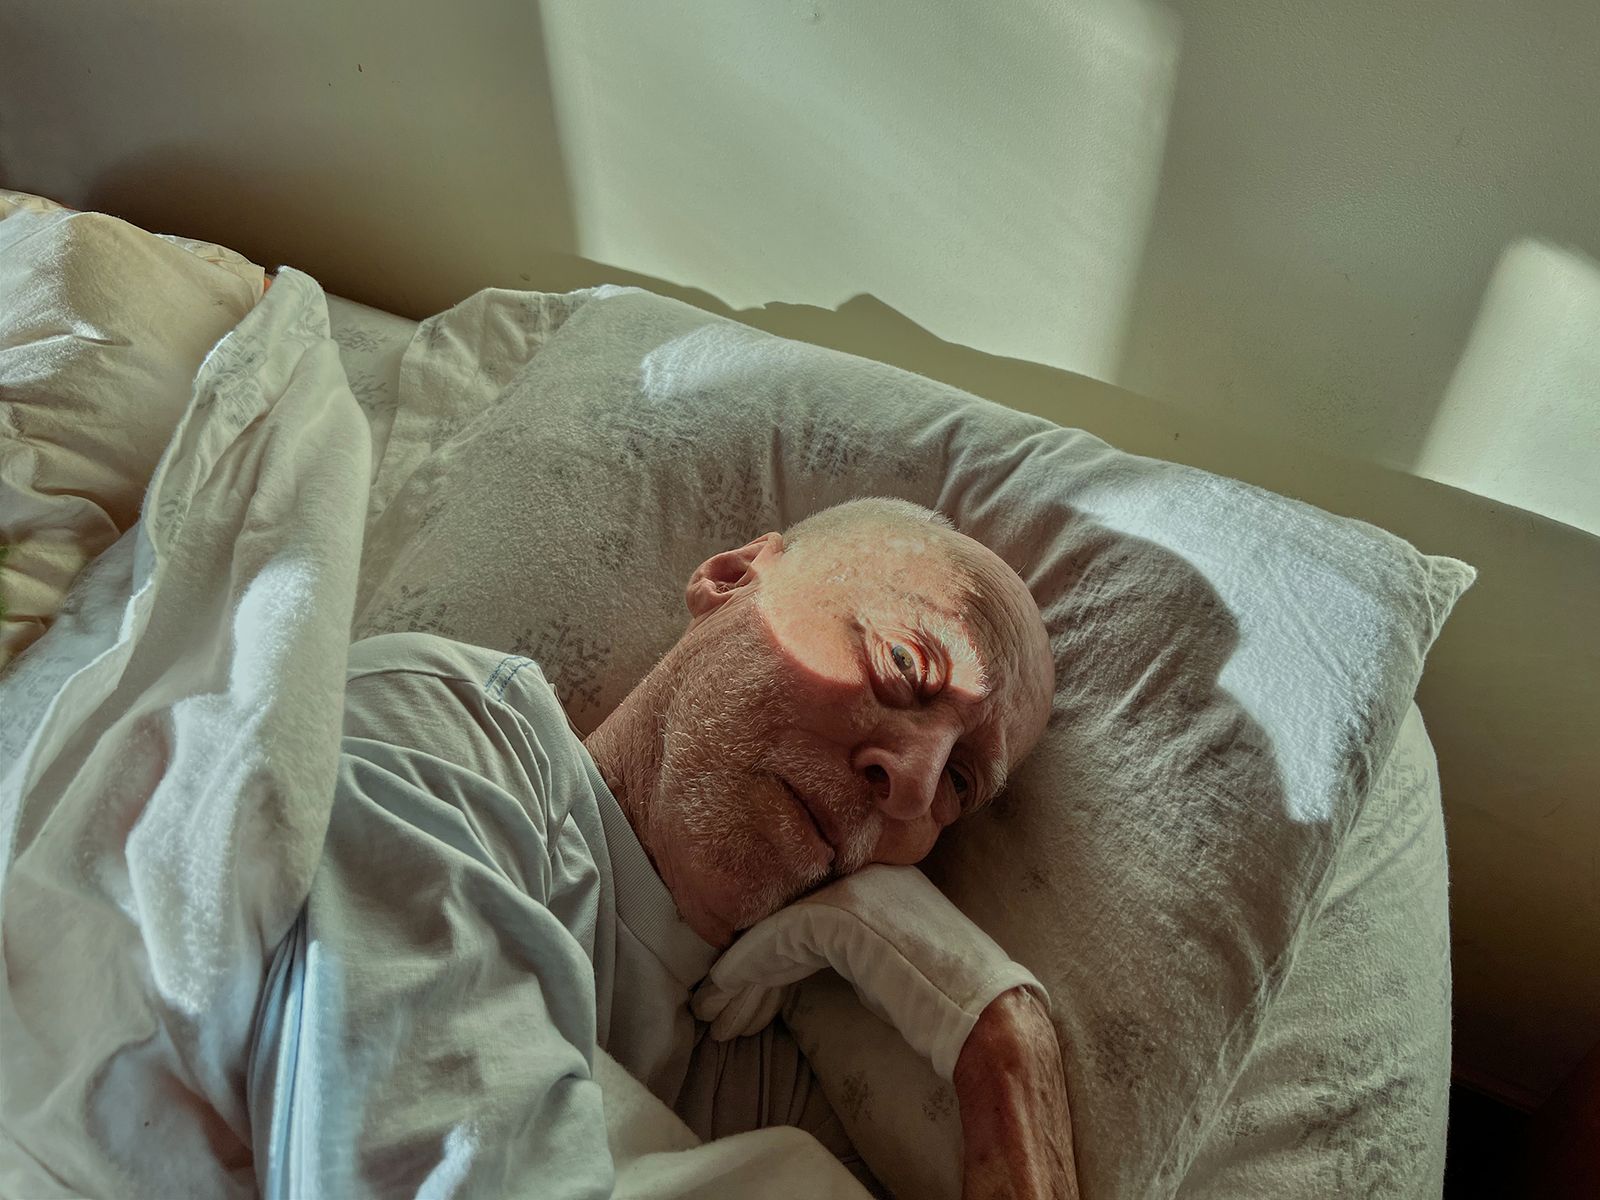 Waking Up With Dementia